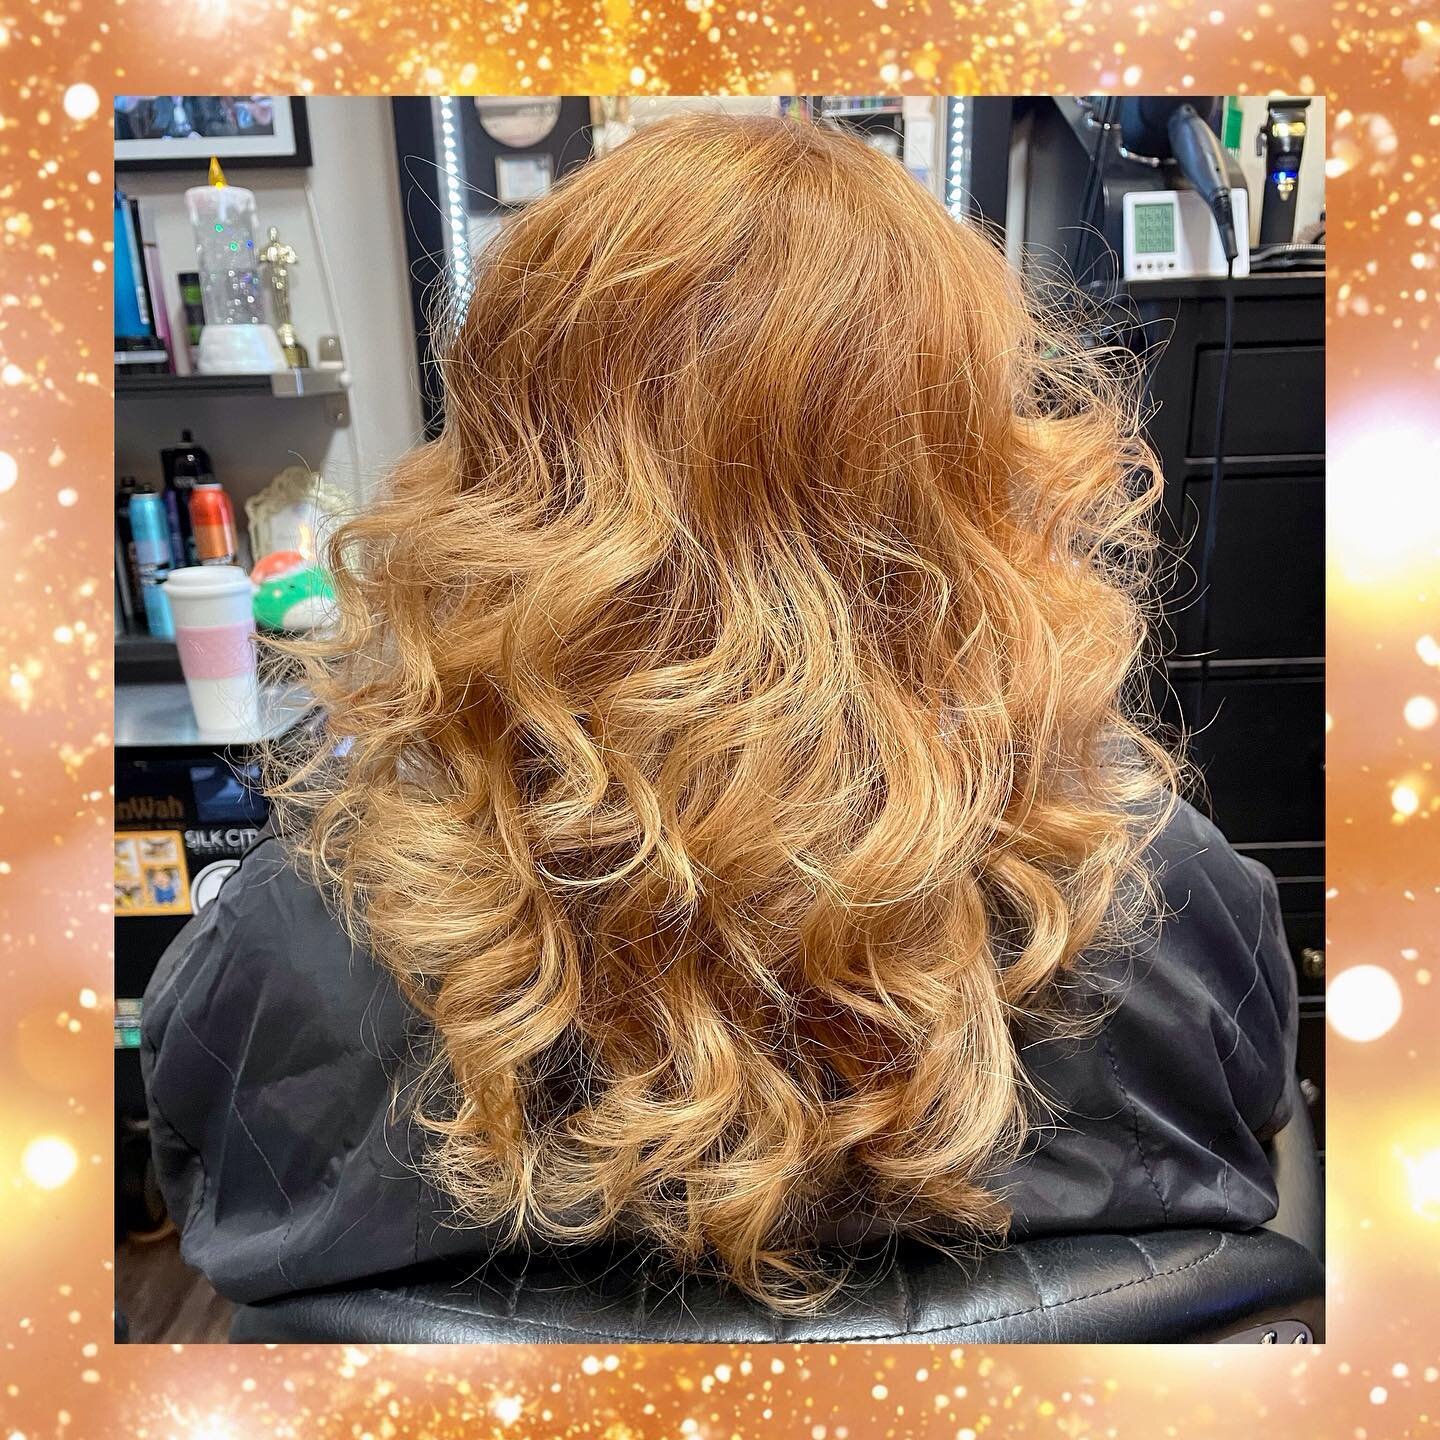 Fall in love with this gorgeous copper 🧡 to vanilla blonde 💛 ombr&eacute; by Cindy #theartistry2020nj #redken #redkenobsessed #redkensalon #ittakesapro #njhairsalon #njhairstylist #njcolorist #licensedtocreate #americansalon #modernsalon #behindthe